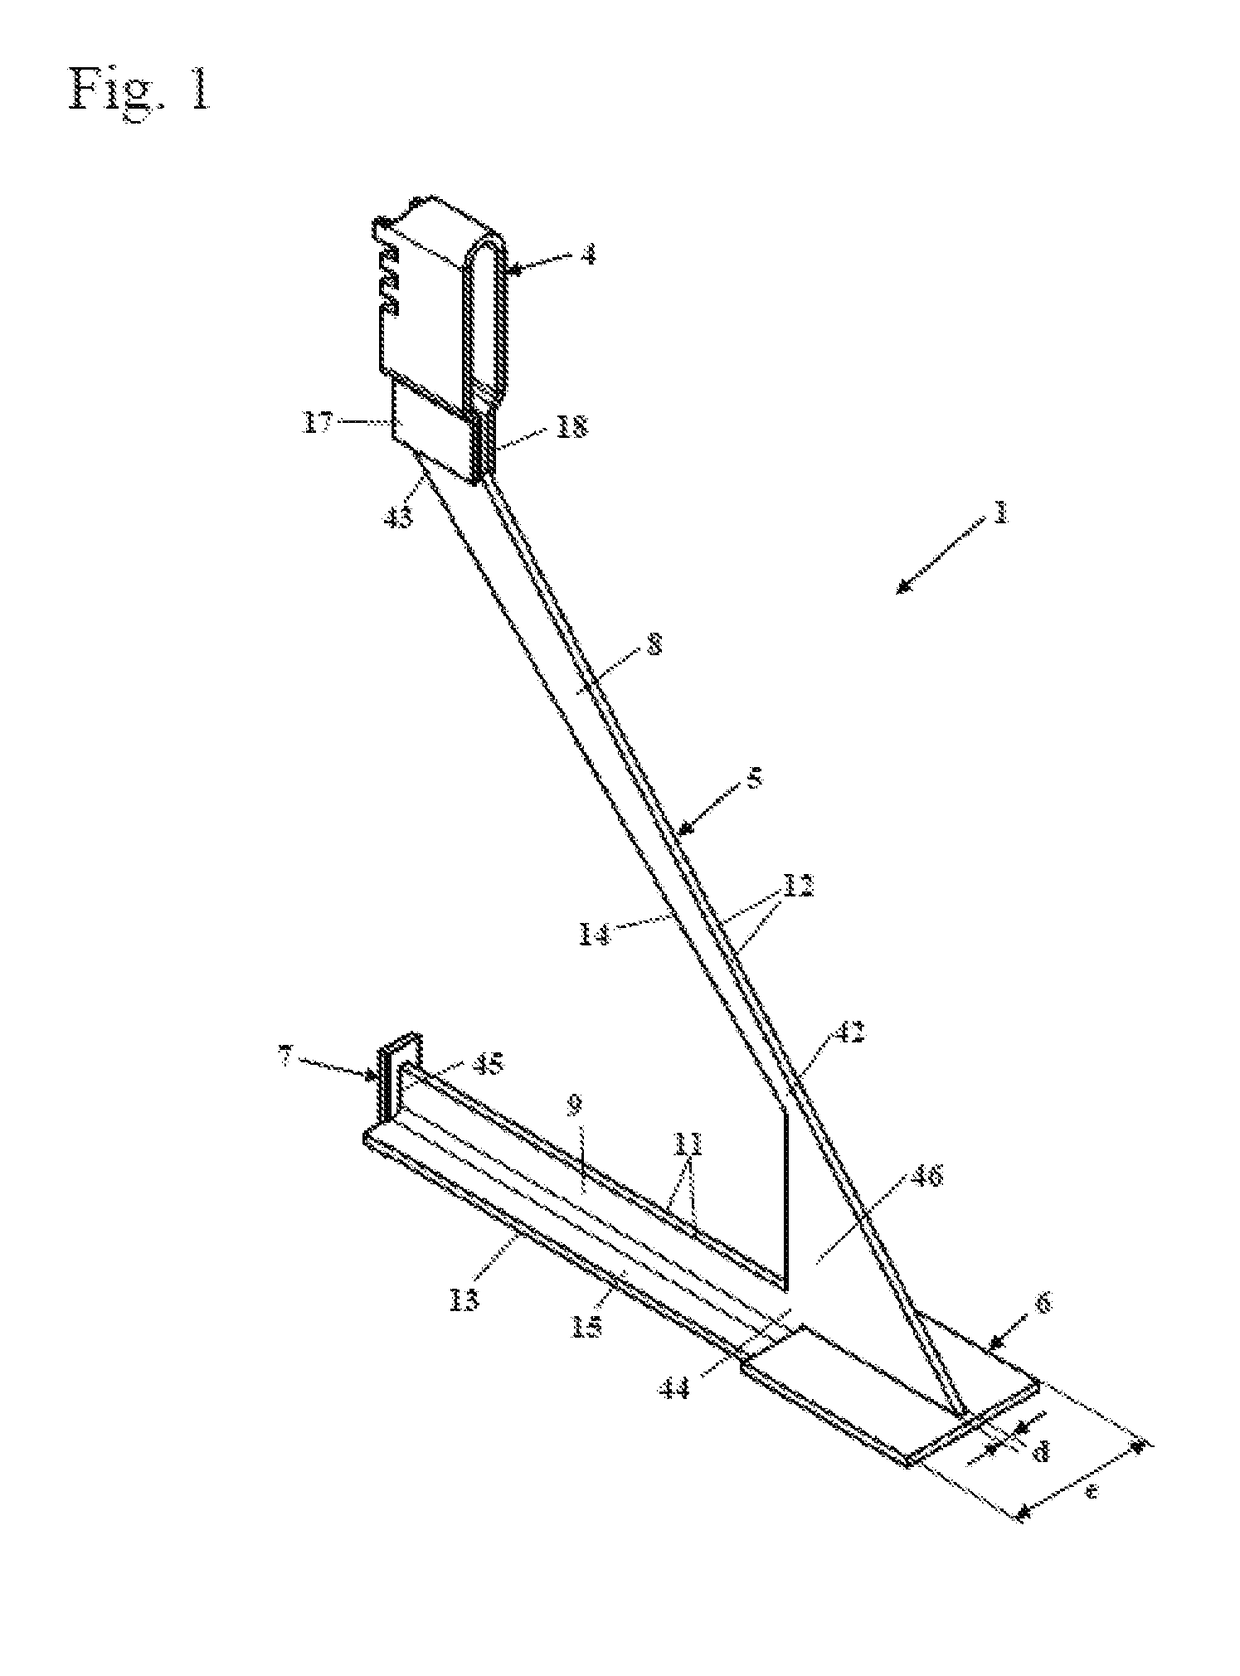 Bracket anchor for fastening a facing in a supporting wall, and web plate of a bracket anchor